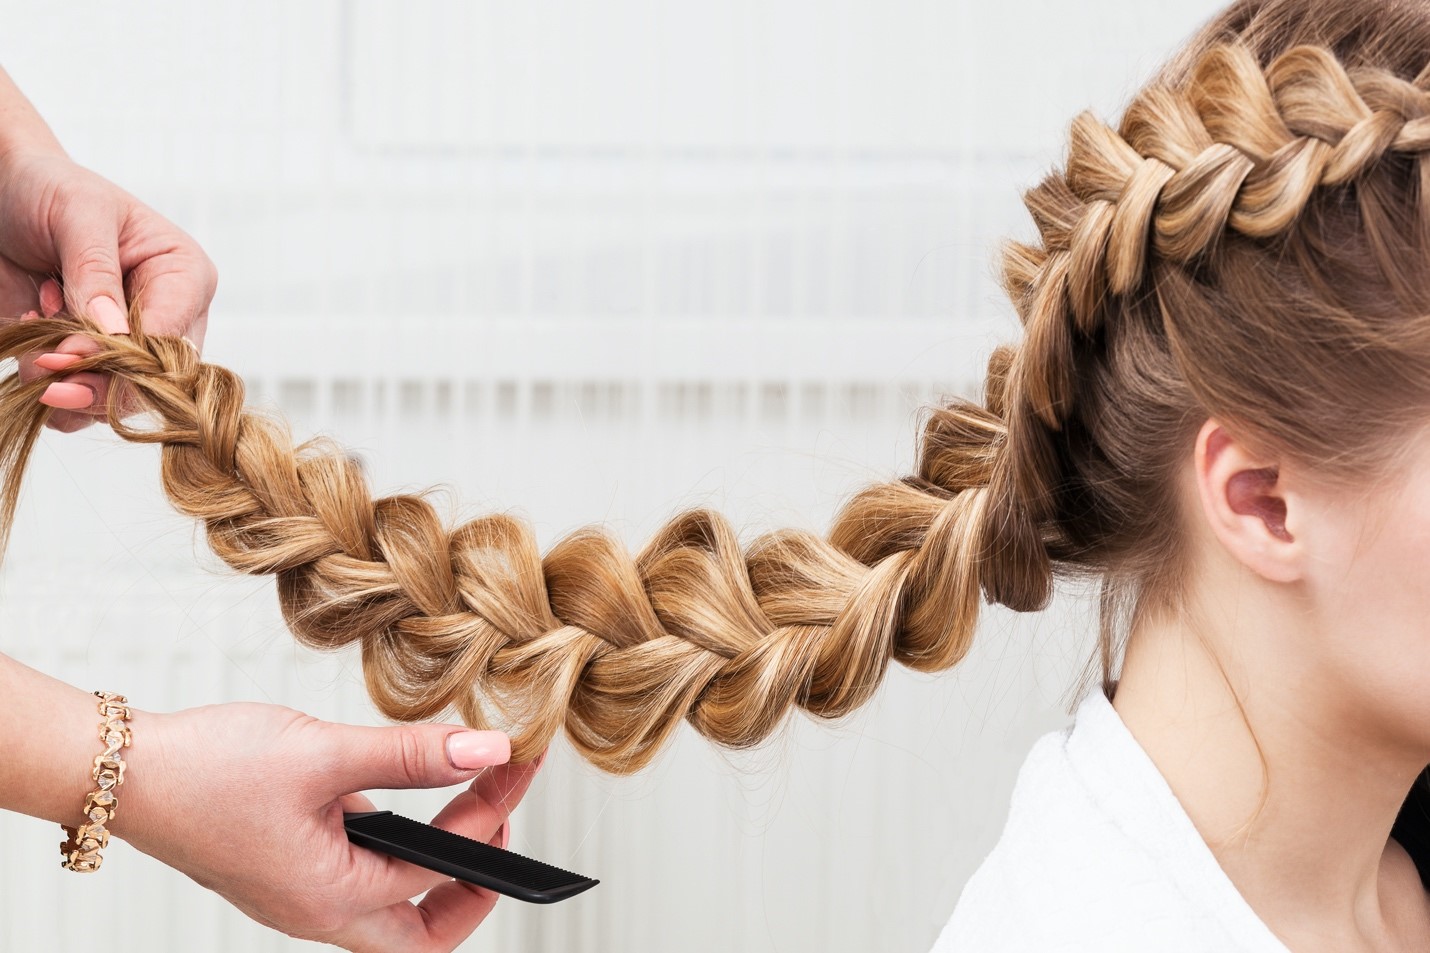 How to Do a HalfUp French Braid Crown in 6 Easy Steps